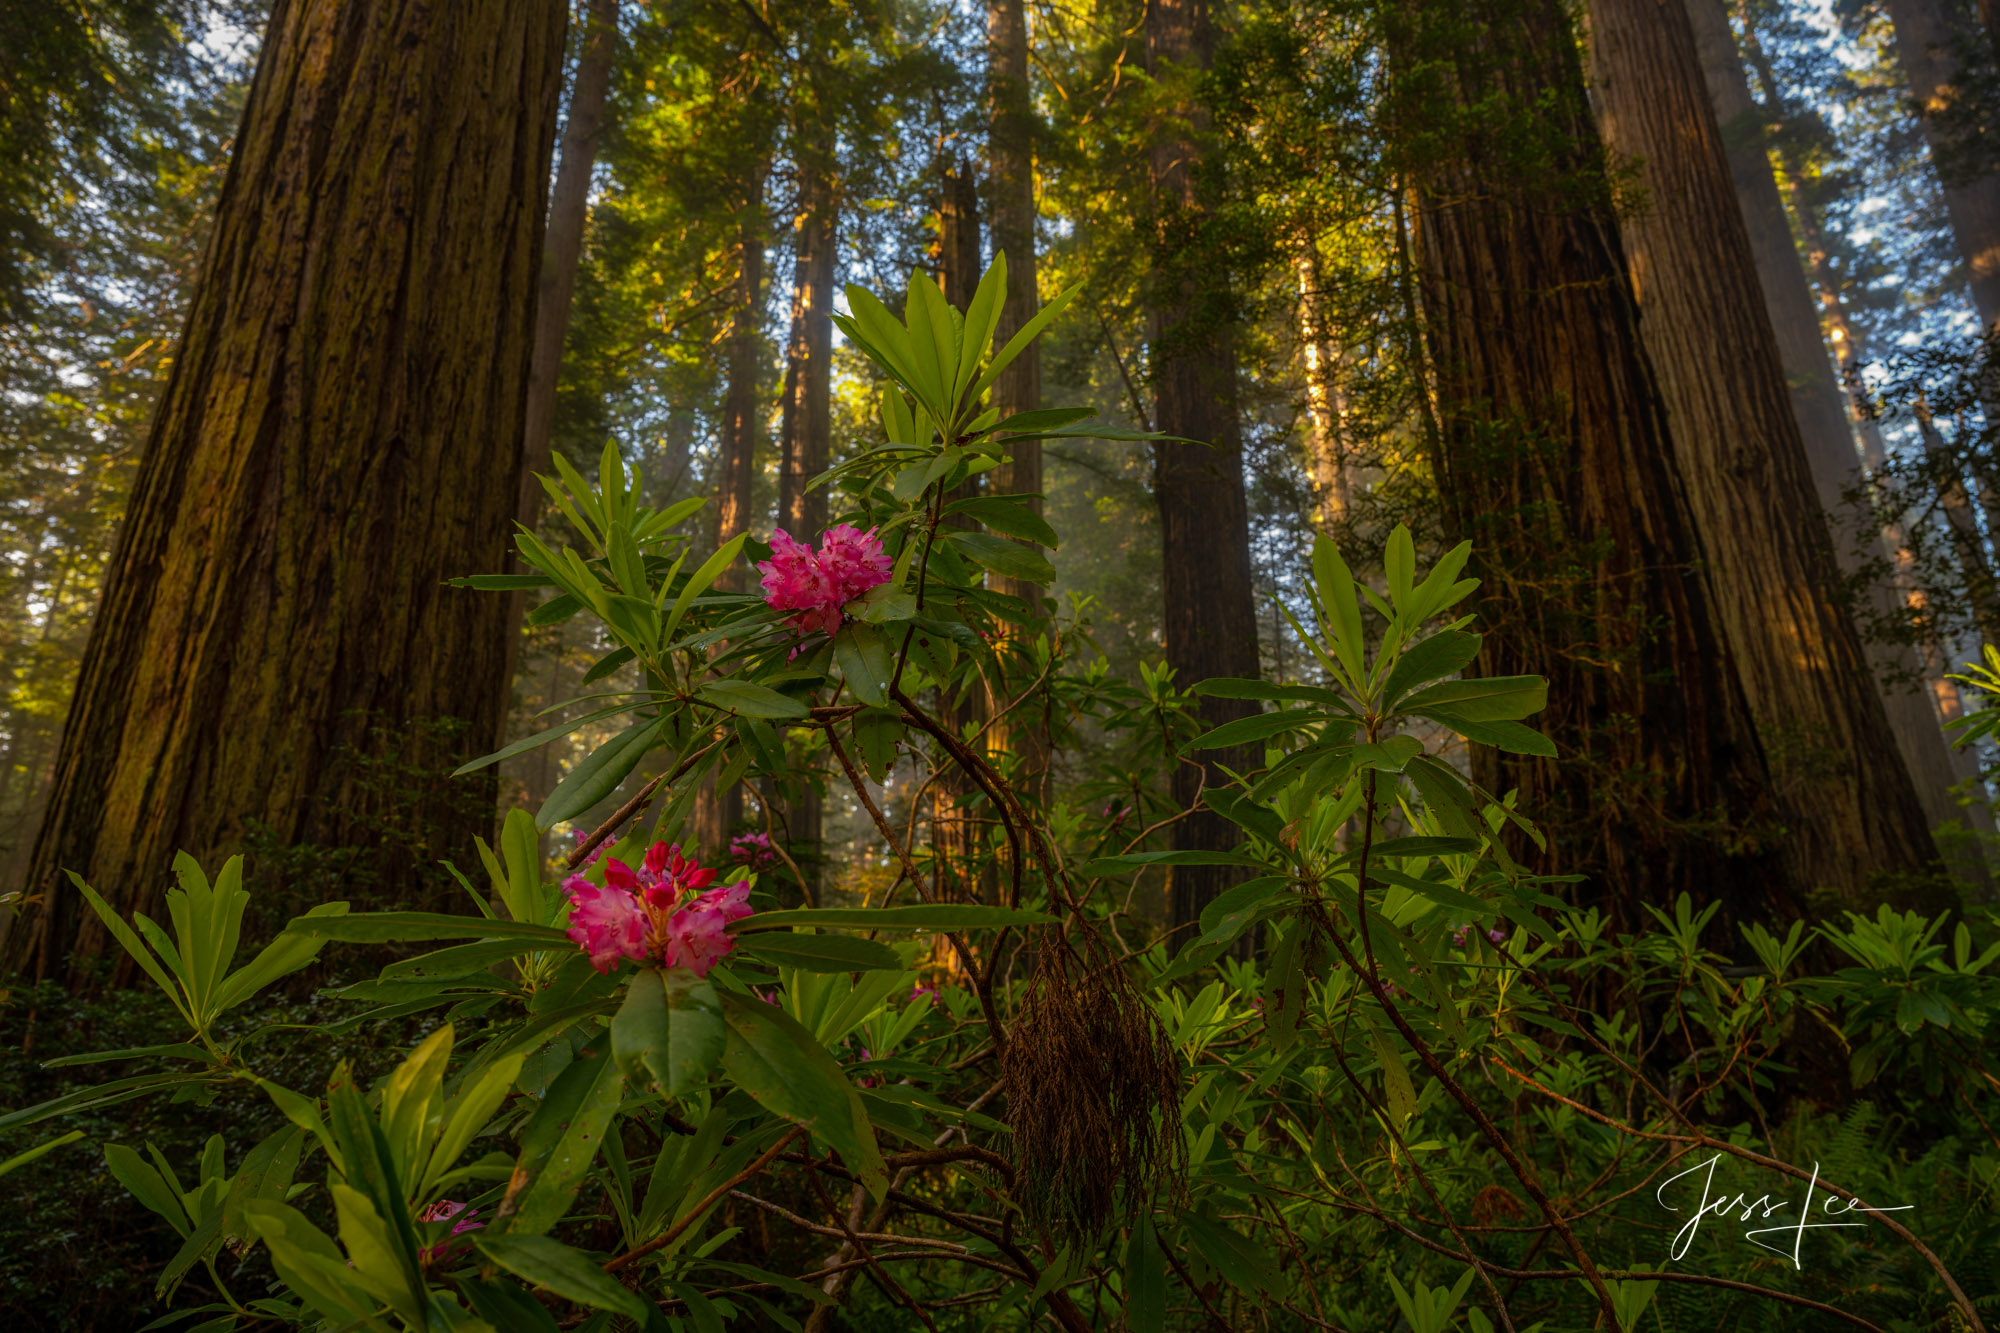 Fine Art Limited Edition Photography of Rhododendrons and Redwoods. Beautiful Landscape Fine Art Print.This is part of the luxurious...